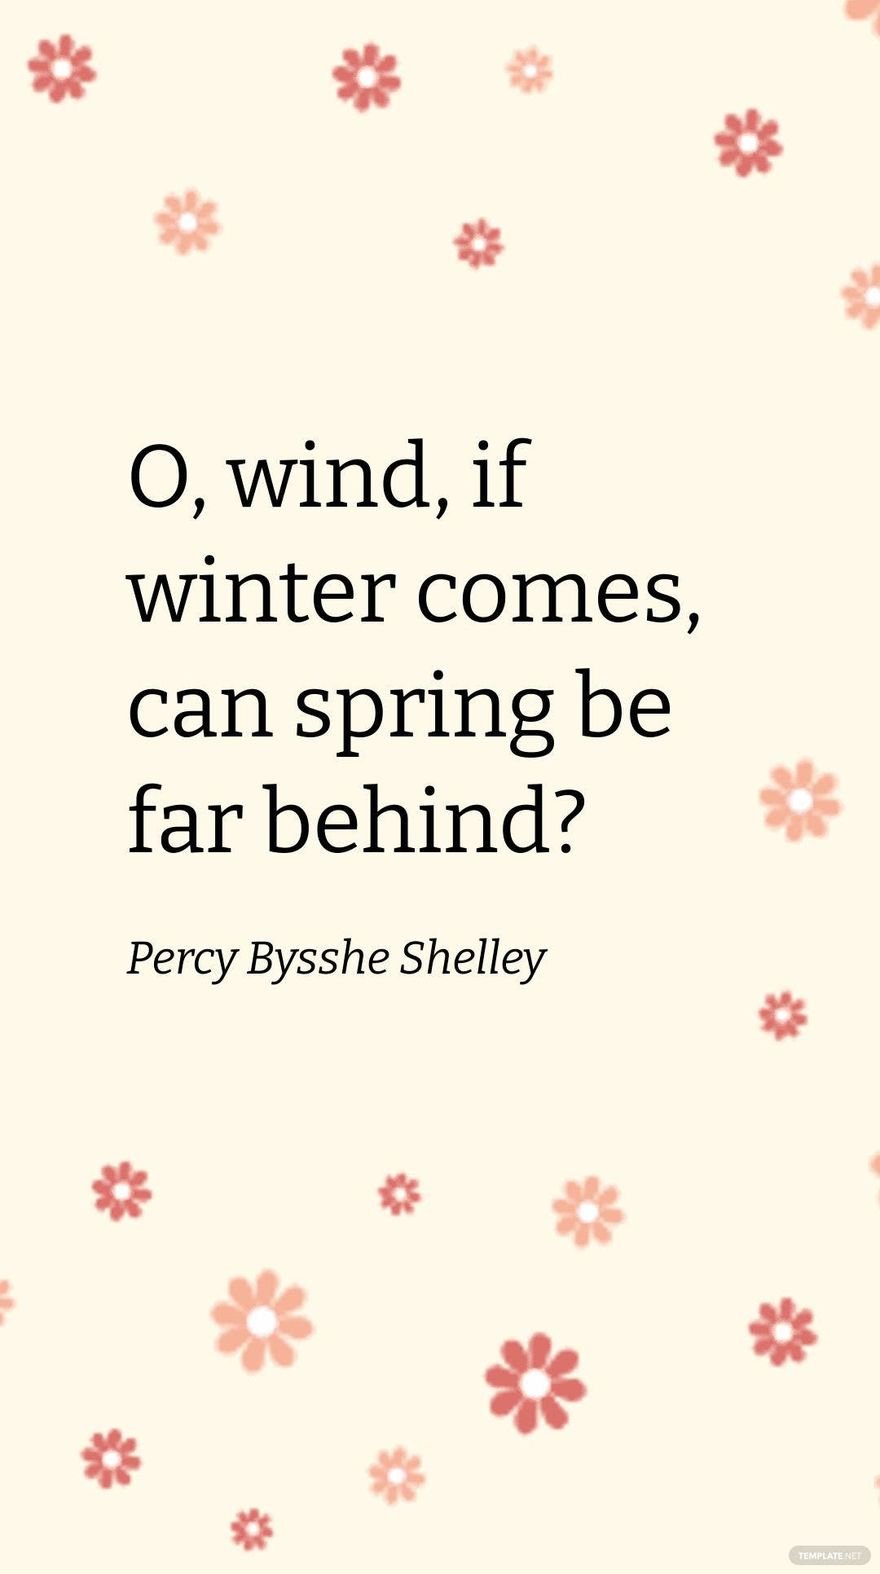 Free Percy Bysshe Shelley - O, wind, if winter comes, can spring be far behind? in JPG